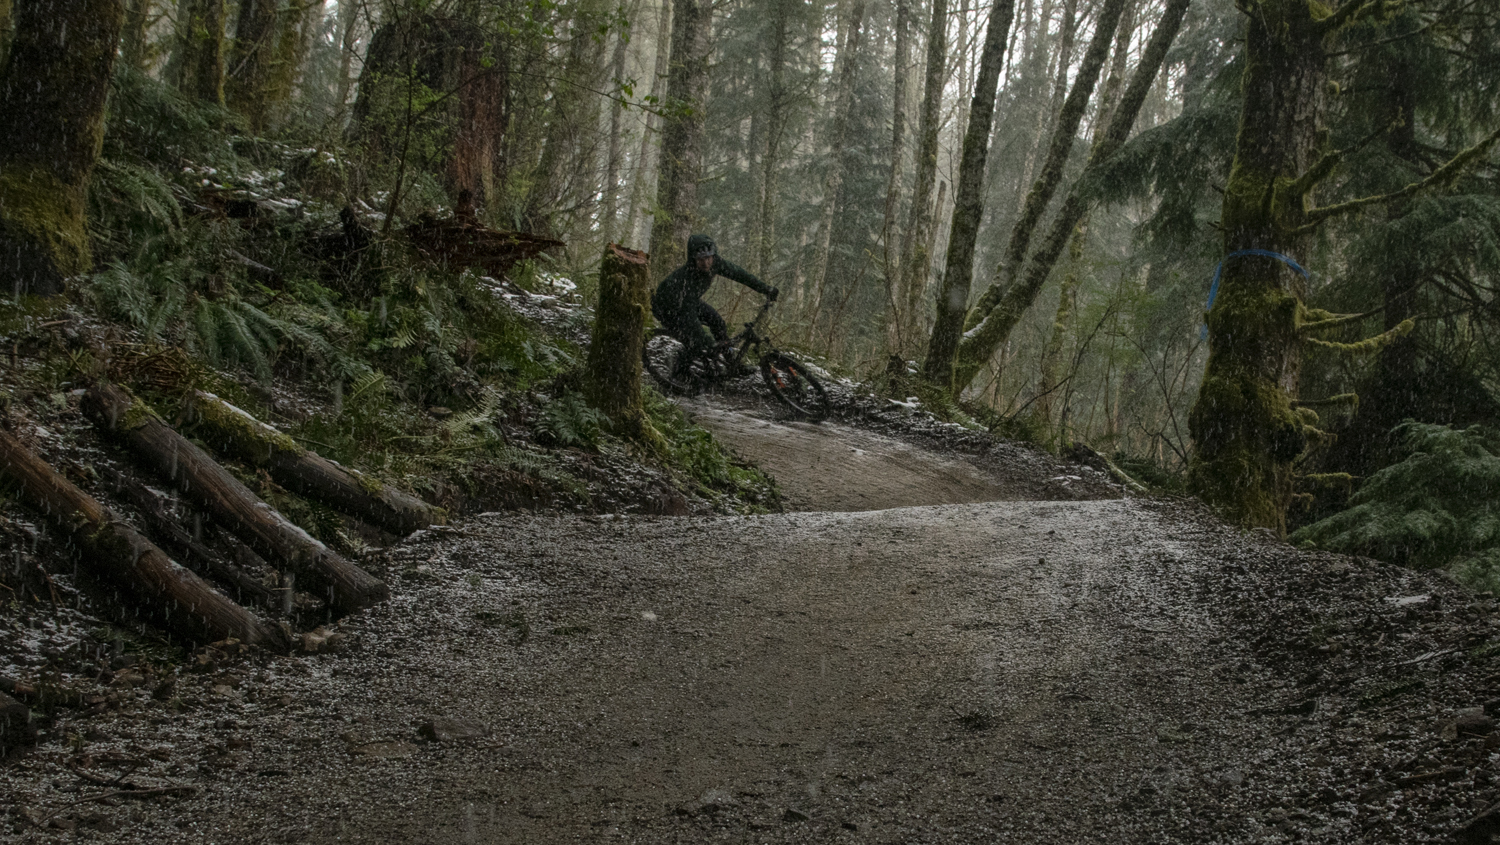 David Golay reviews the Ride Concepts Tallac Clip for Blister